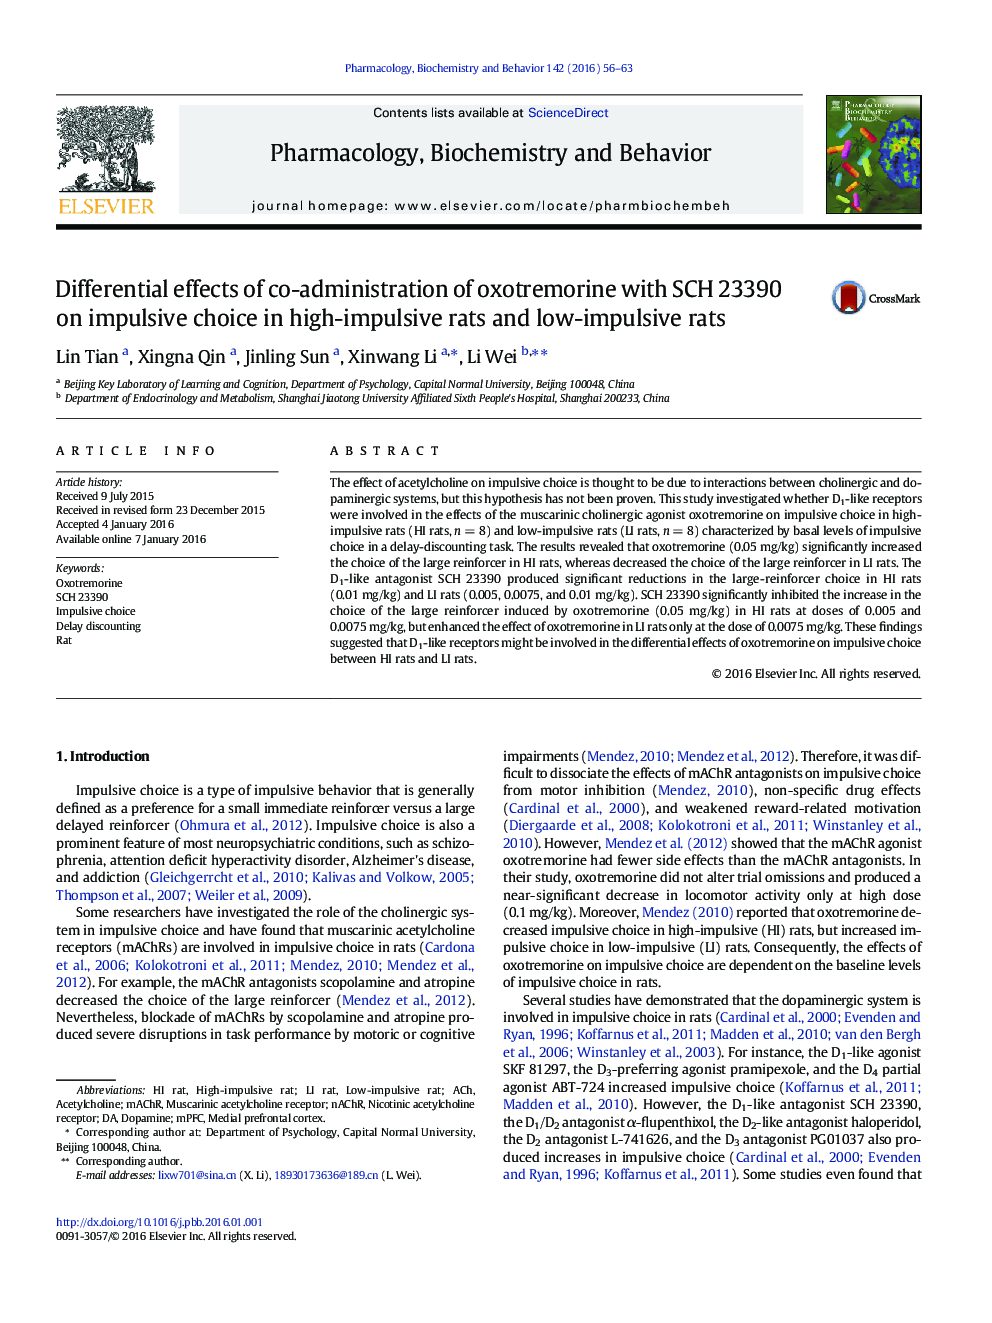 Differential effects of co-administration of oxotremorine with SCH 23390 on impulsive choice in high-impulsive rats and low-impulsive rats